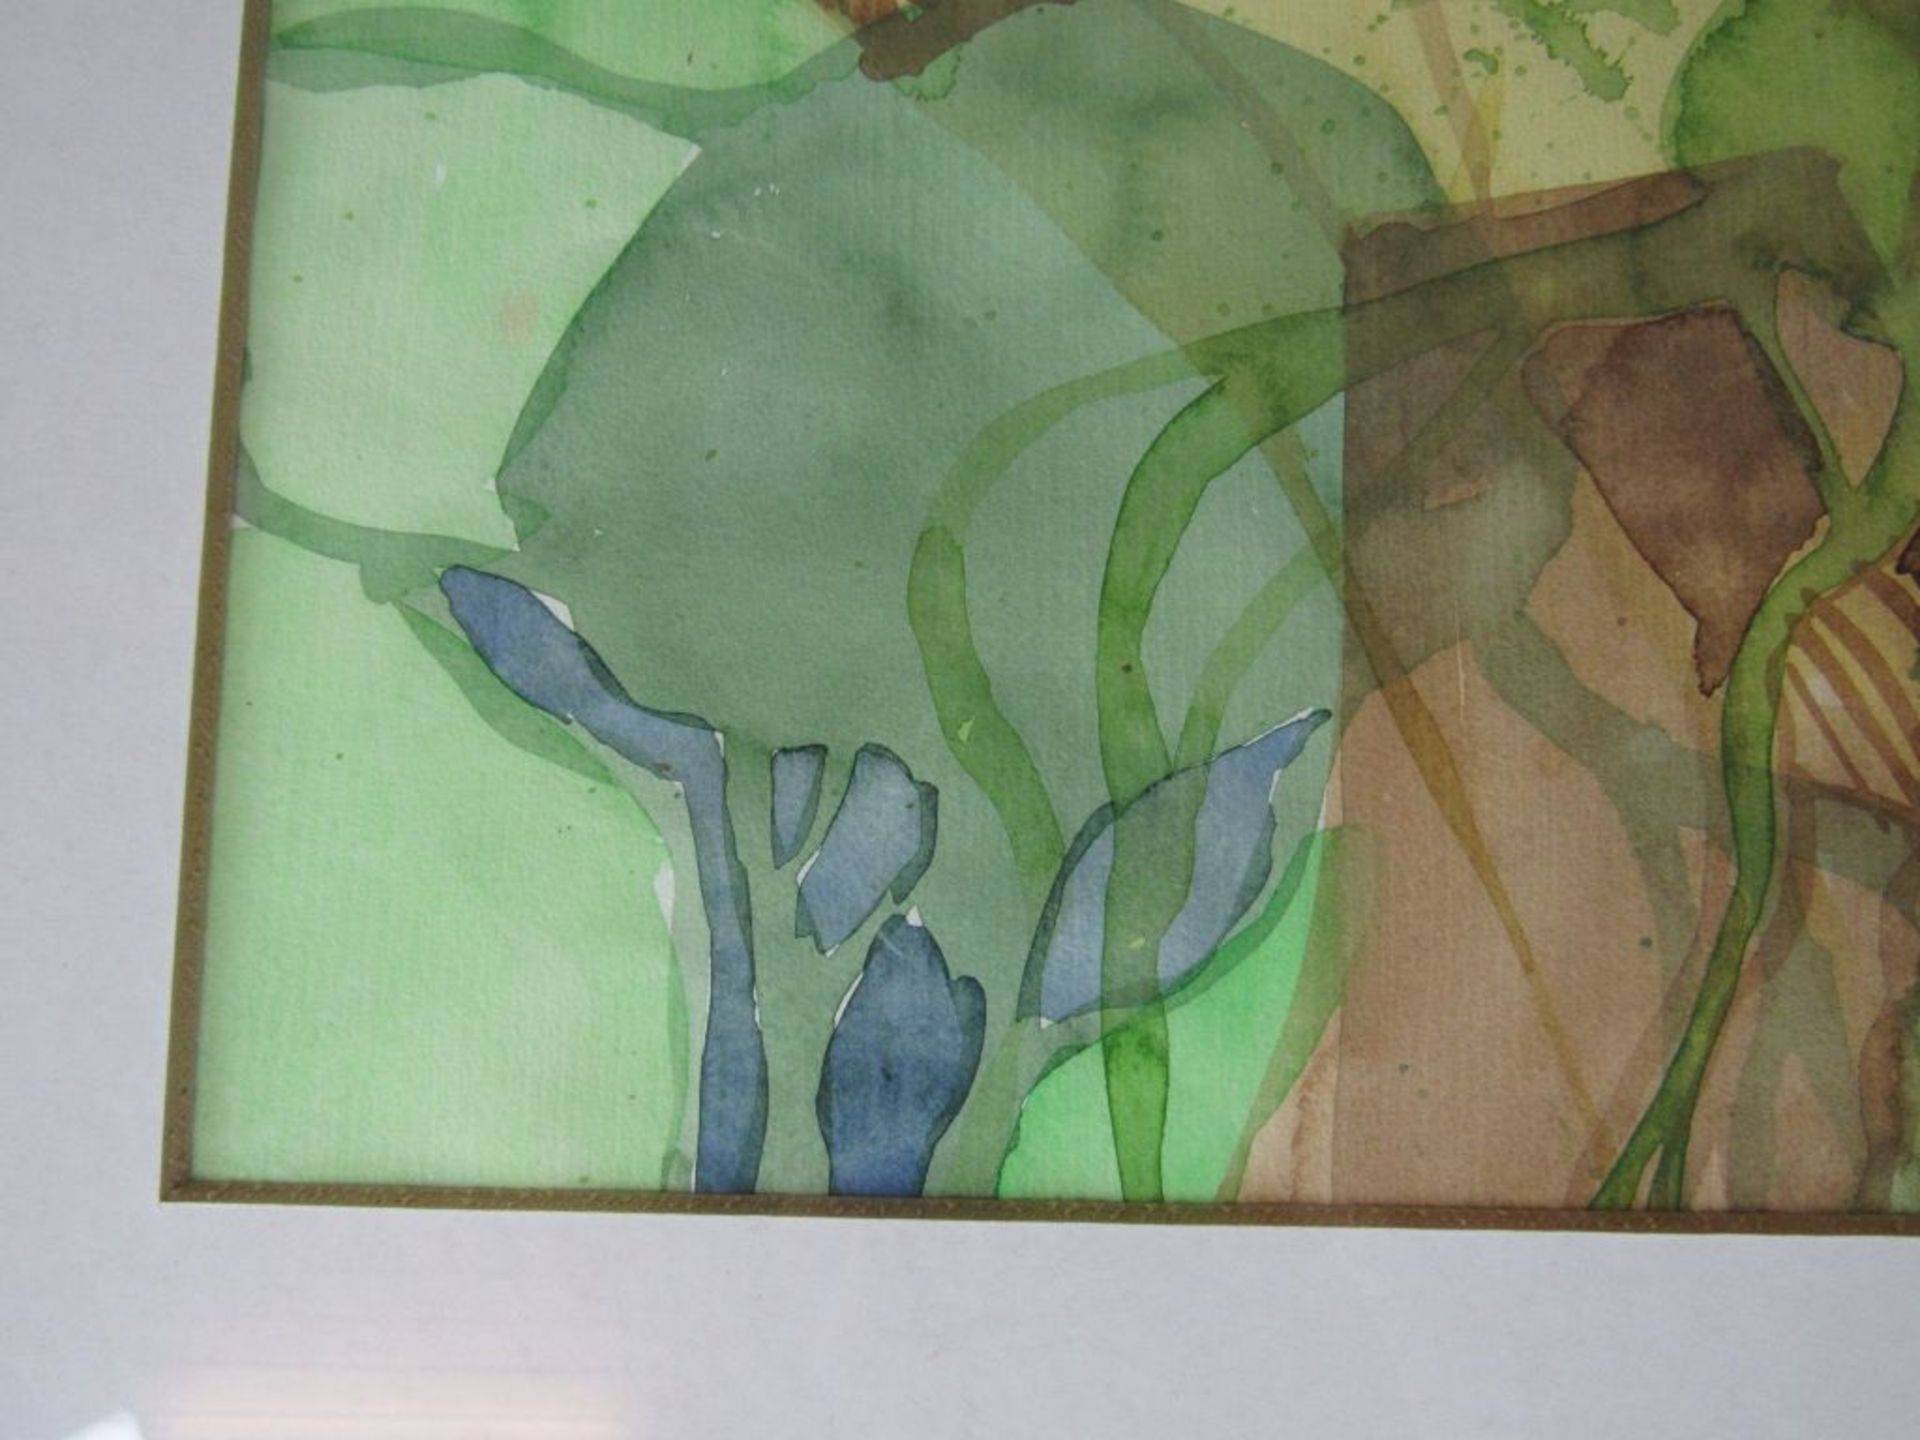 Aquarell vorderseits unleserlich - Image 6 of 9